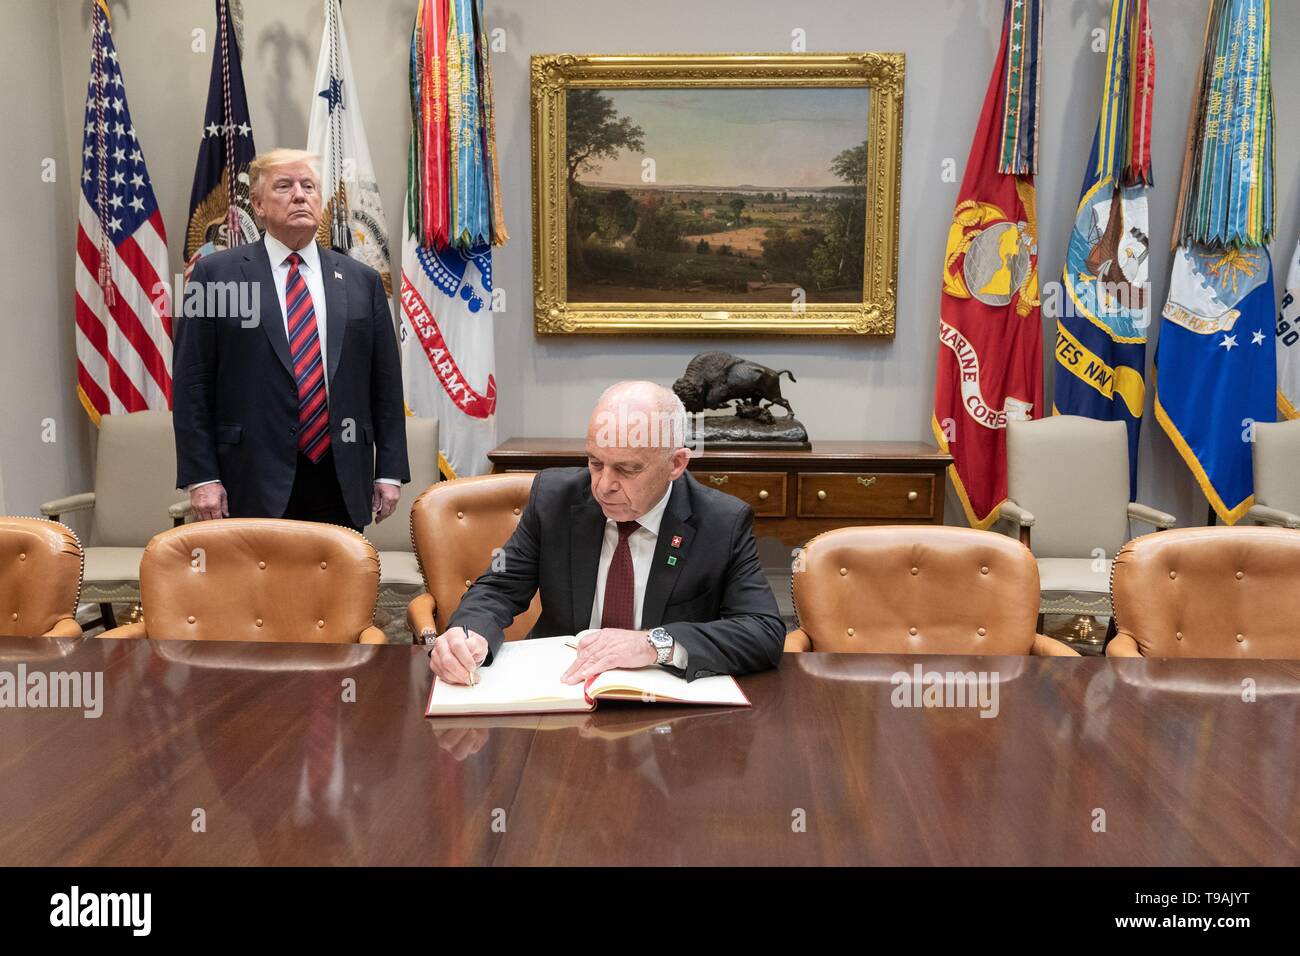 U.S President Donald Trump waits as Swiss President Ueli Maurer signs the guest book in the Roosevelt Room of the White House May 16, 2019 in Washington, DC. Stock Photo